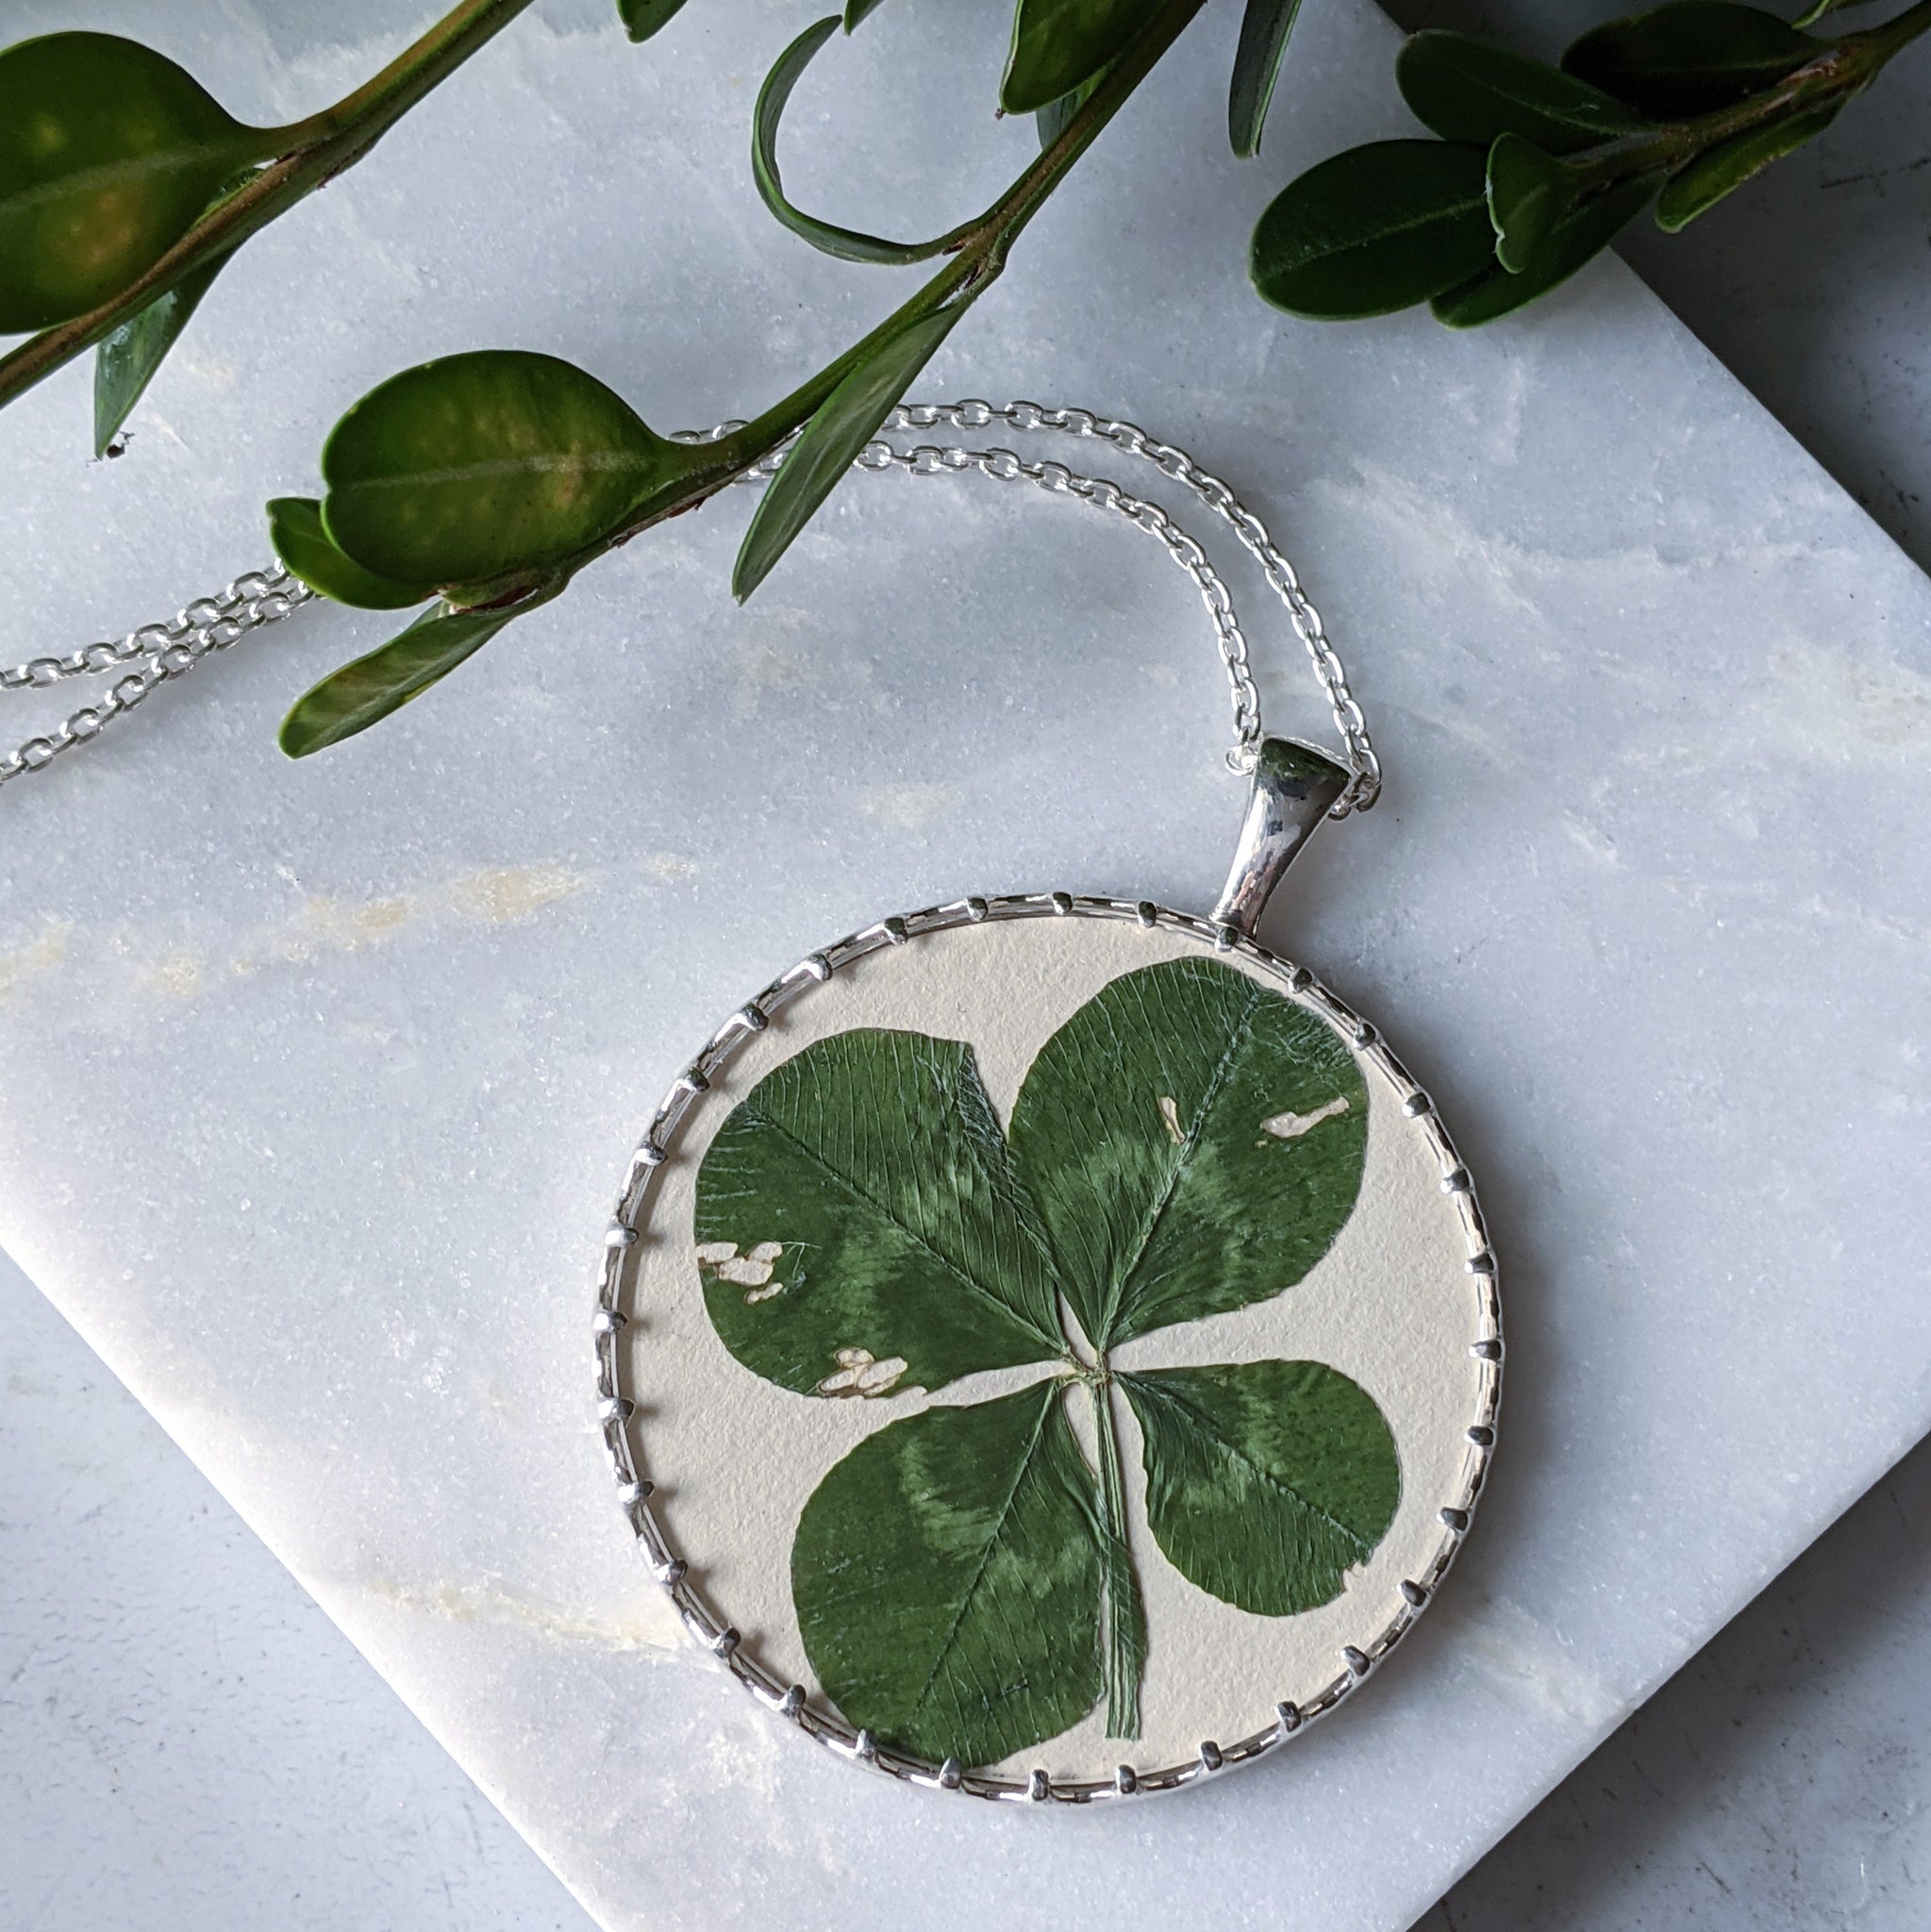 Pressed four leaf clover in a sterling silver and glass pendant. The pendant sits atop a marble slab, with green leaves along the top of the image.